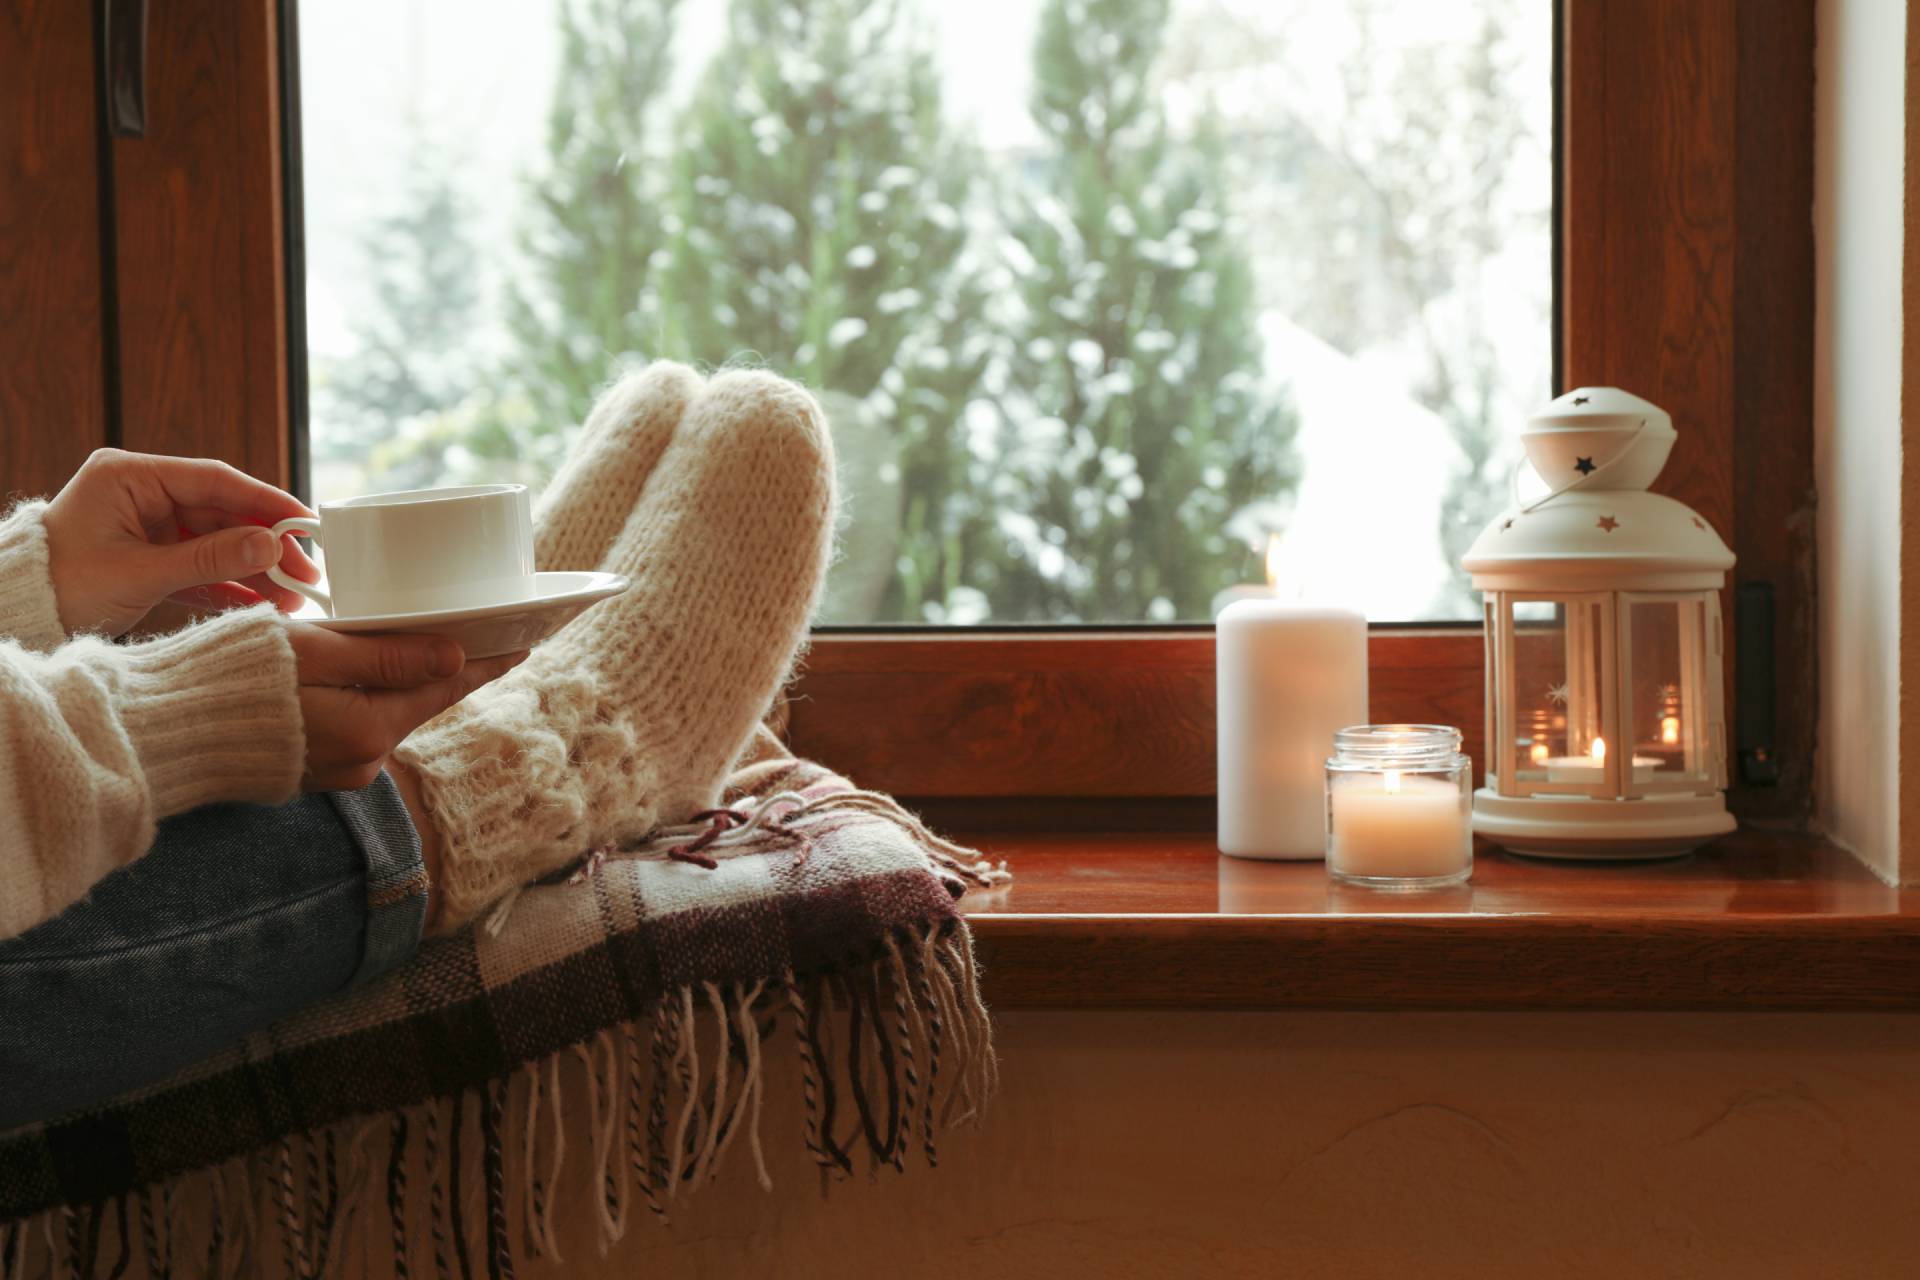 10 Tips for Keeping Your Home Cozy and Warm This Winter